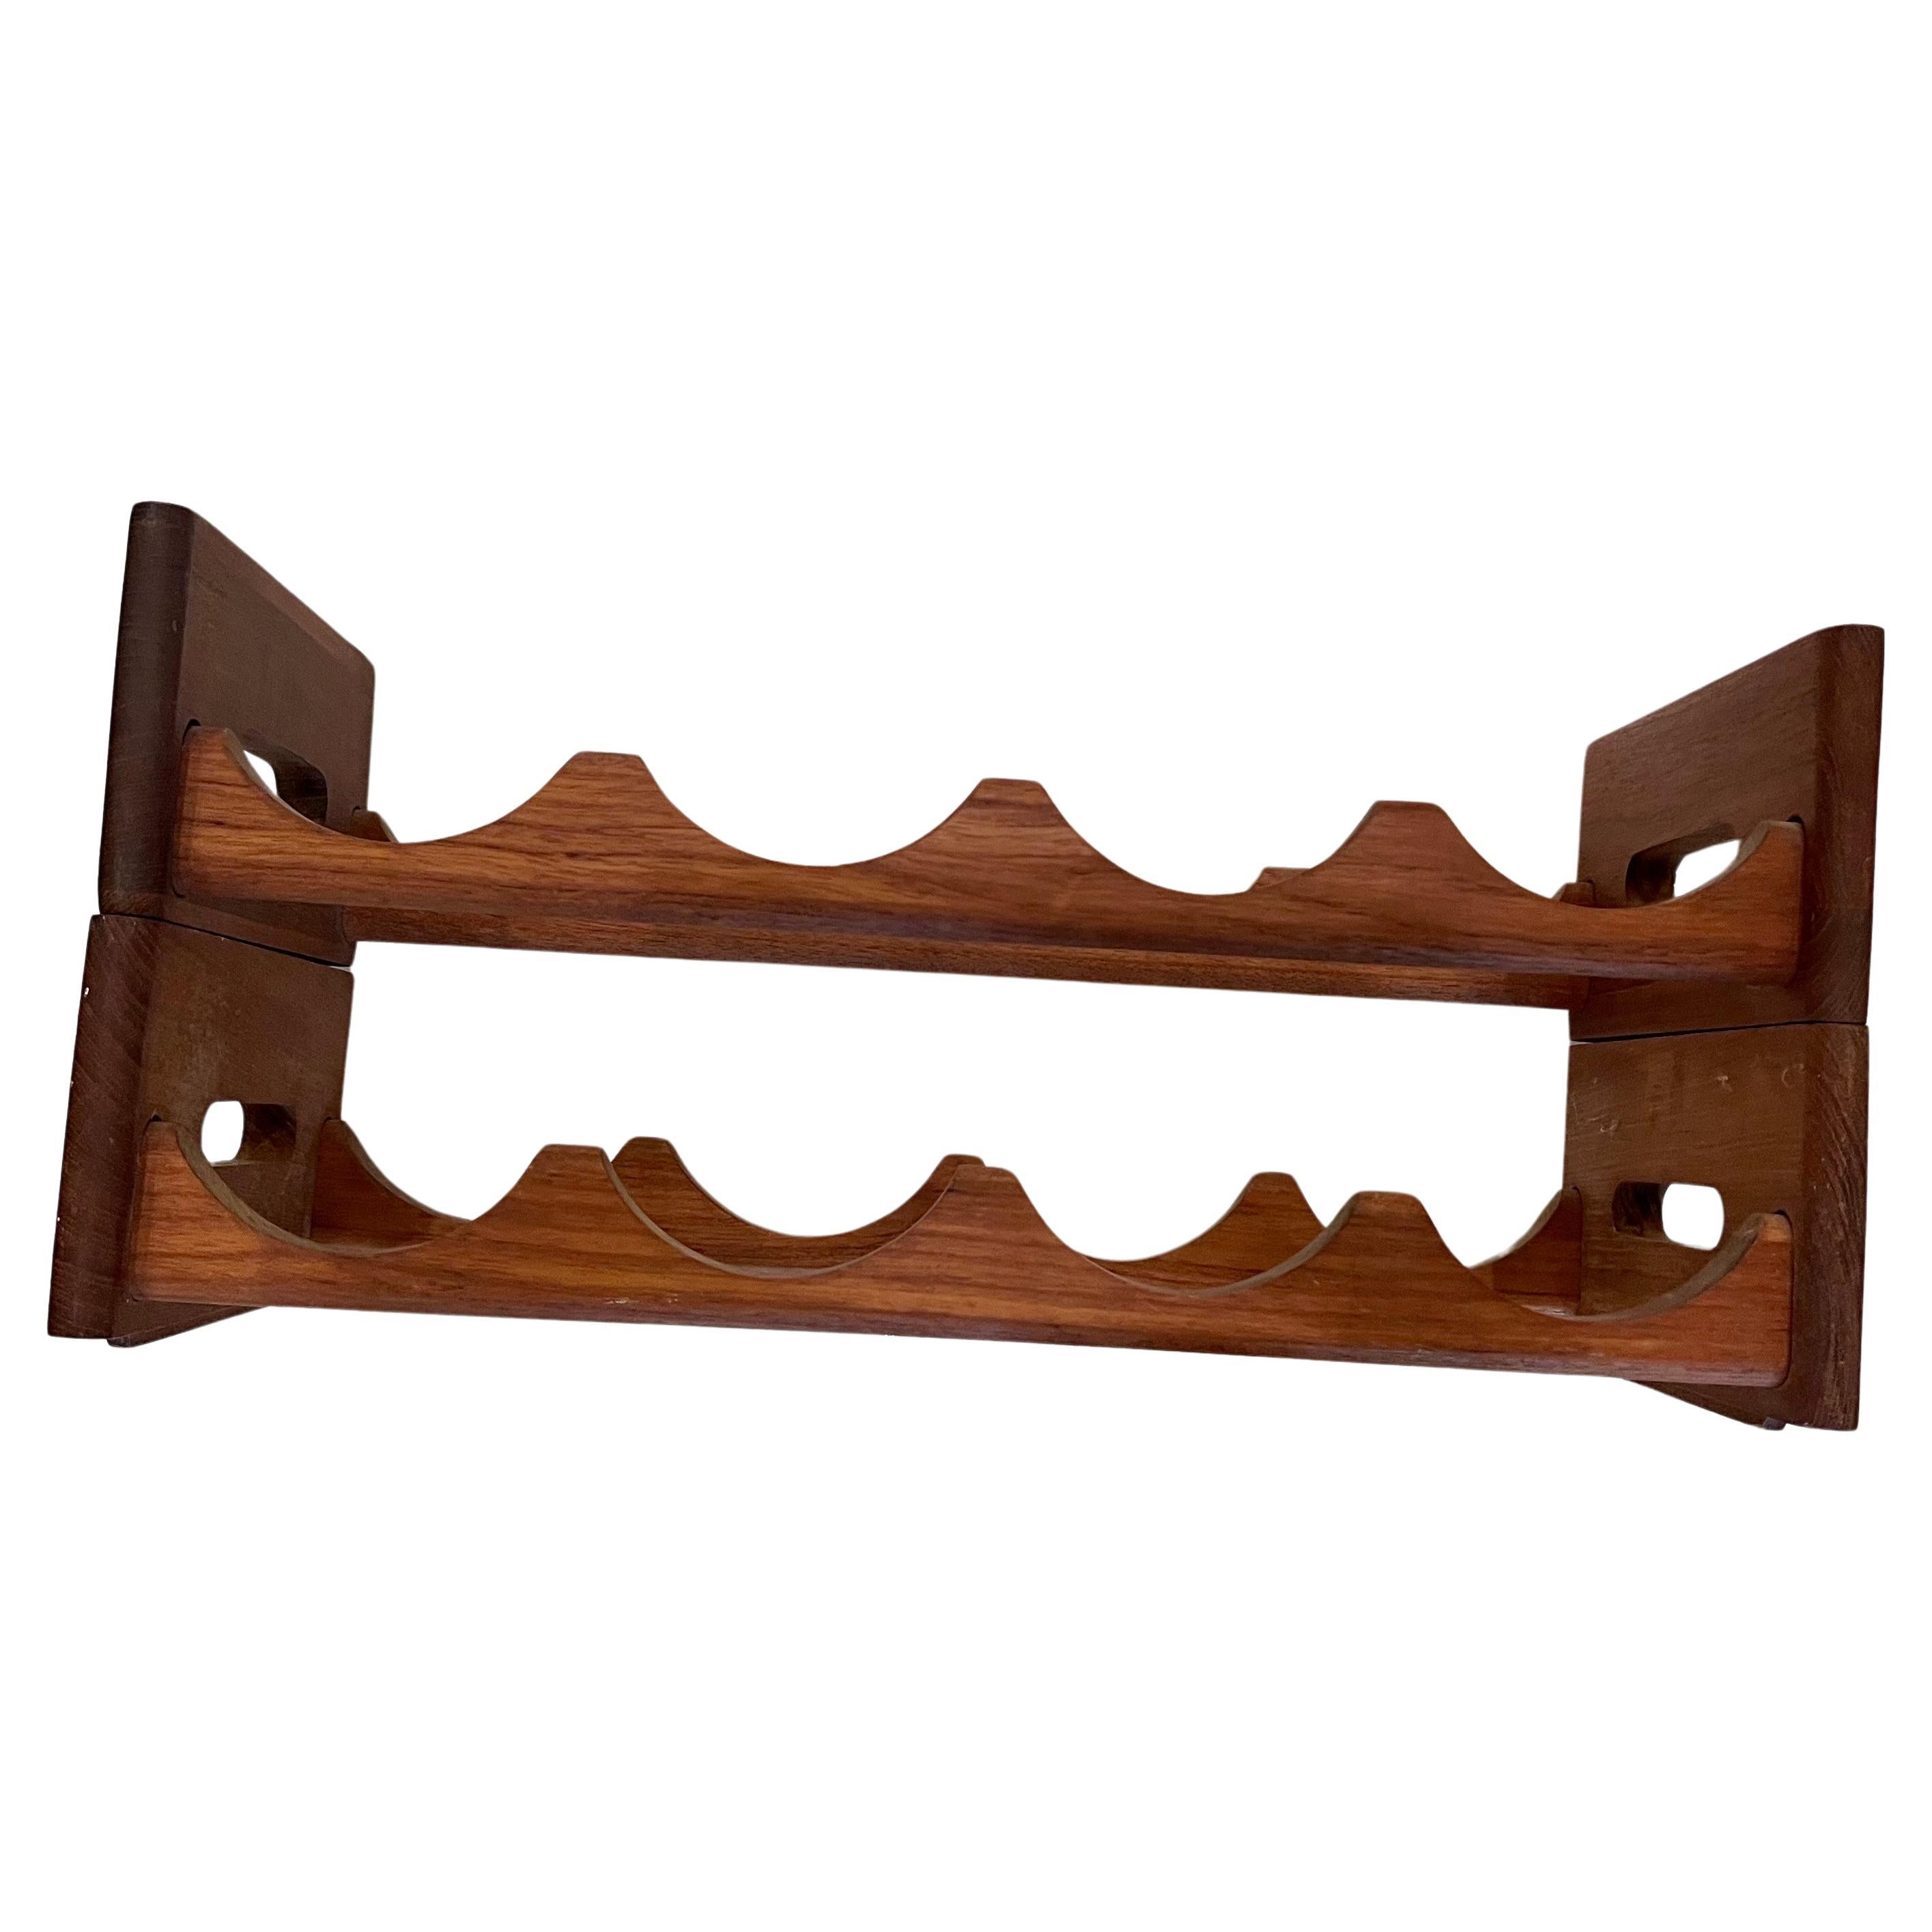 Midcentury stackable solid teak wine rack by Kalmar Designs, circa the 1970s. This double rack can hold up to 8 bottles and can be used one on top of the other or side by side.